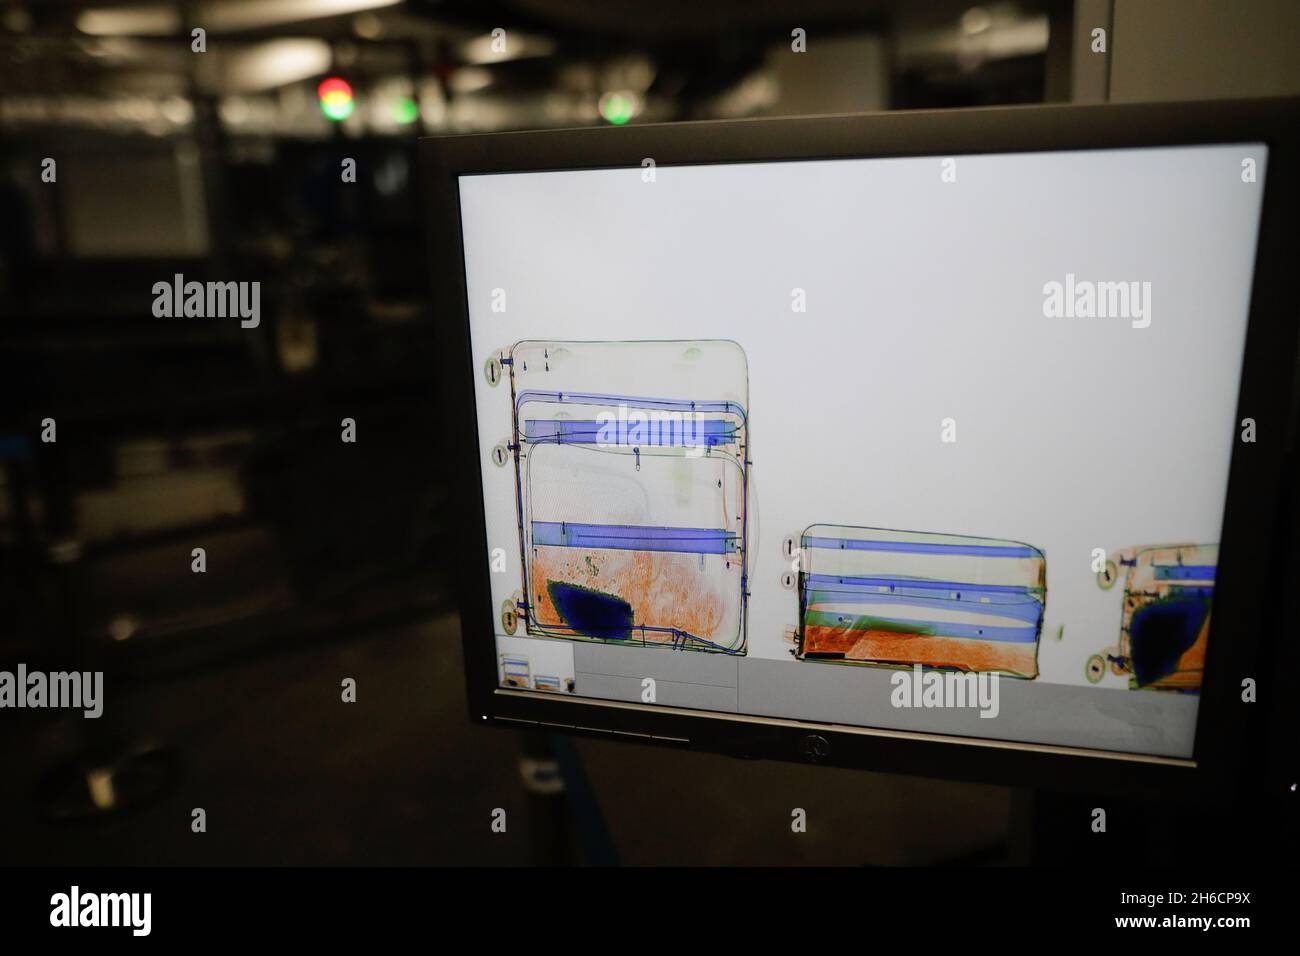 Shallow depth of field (selective focus) image with a screen showing luggages inside an x-ray scanning machine at an airport - airport security check. Stock Photo